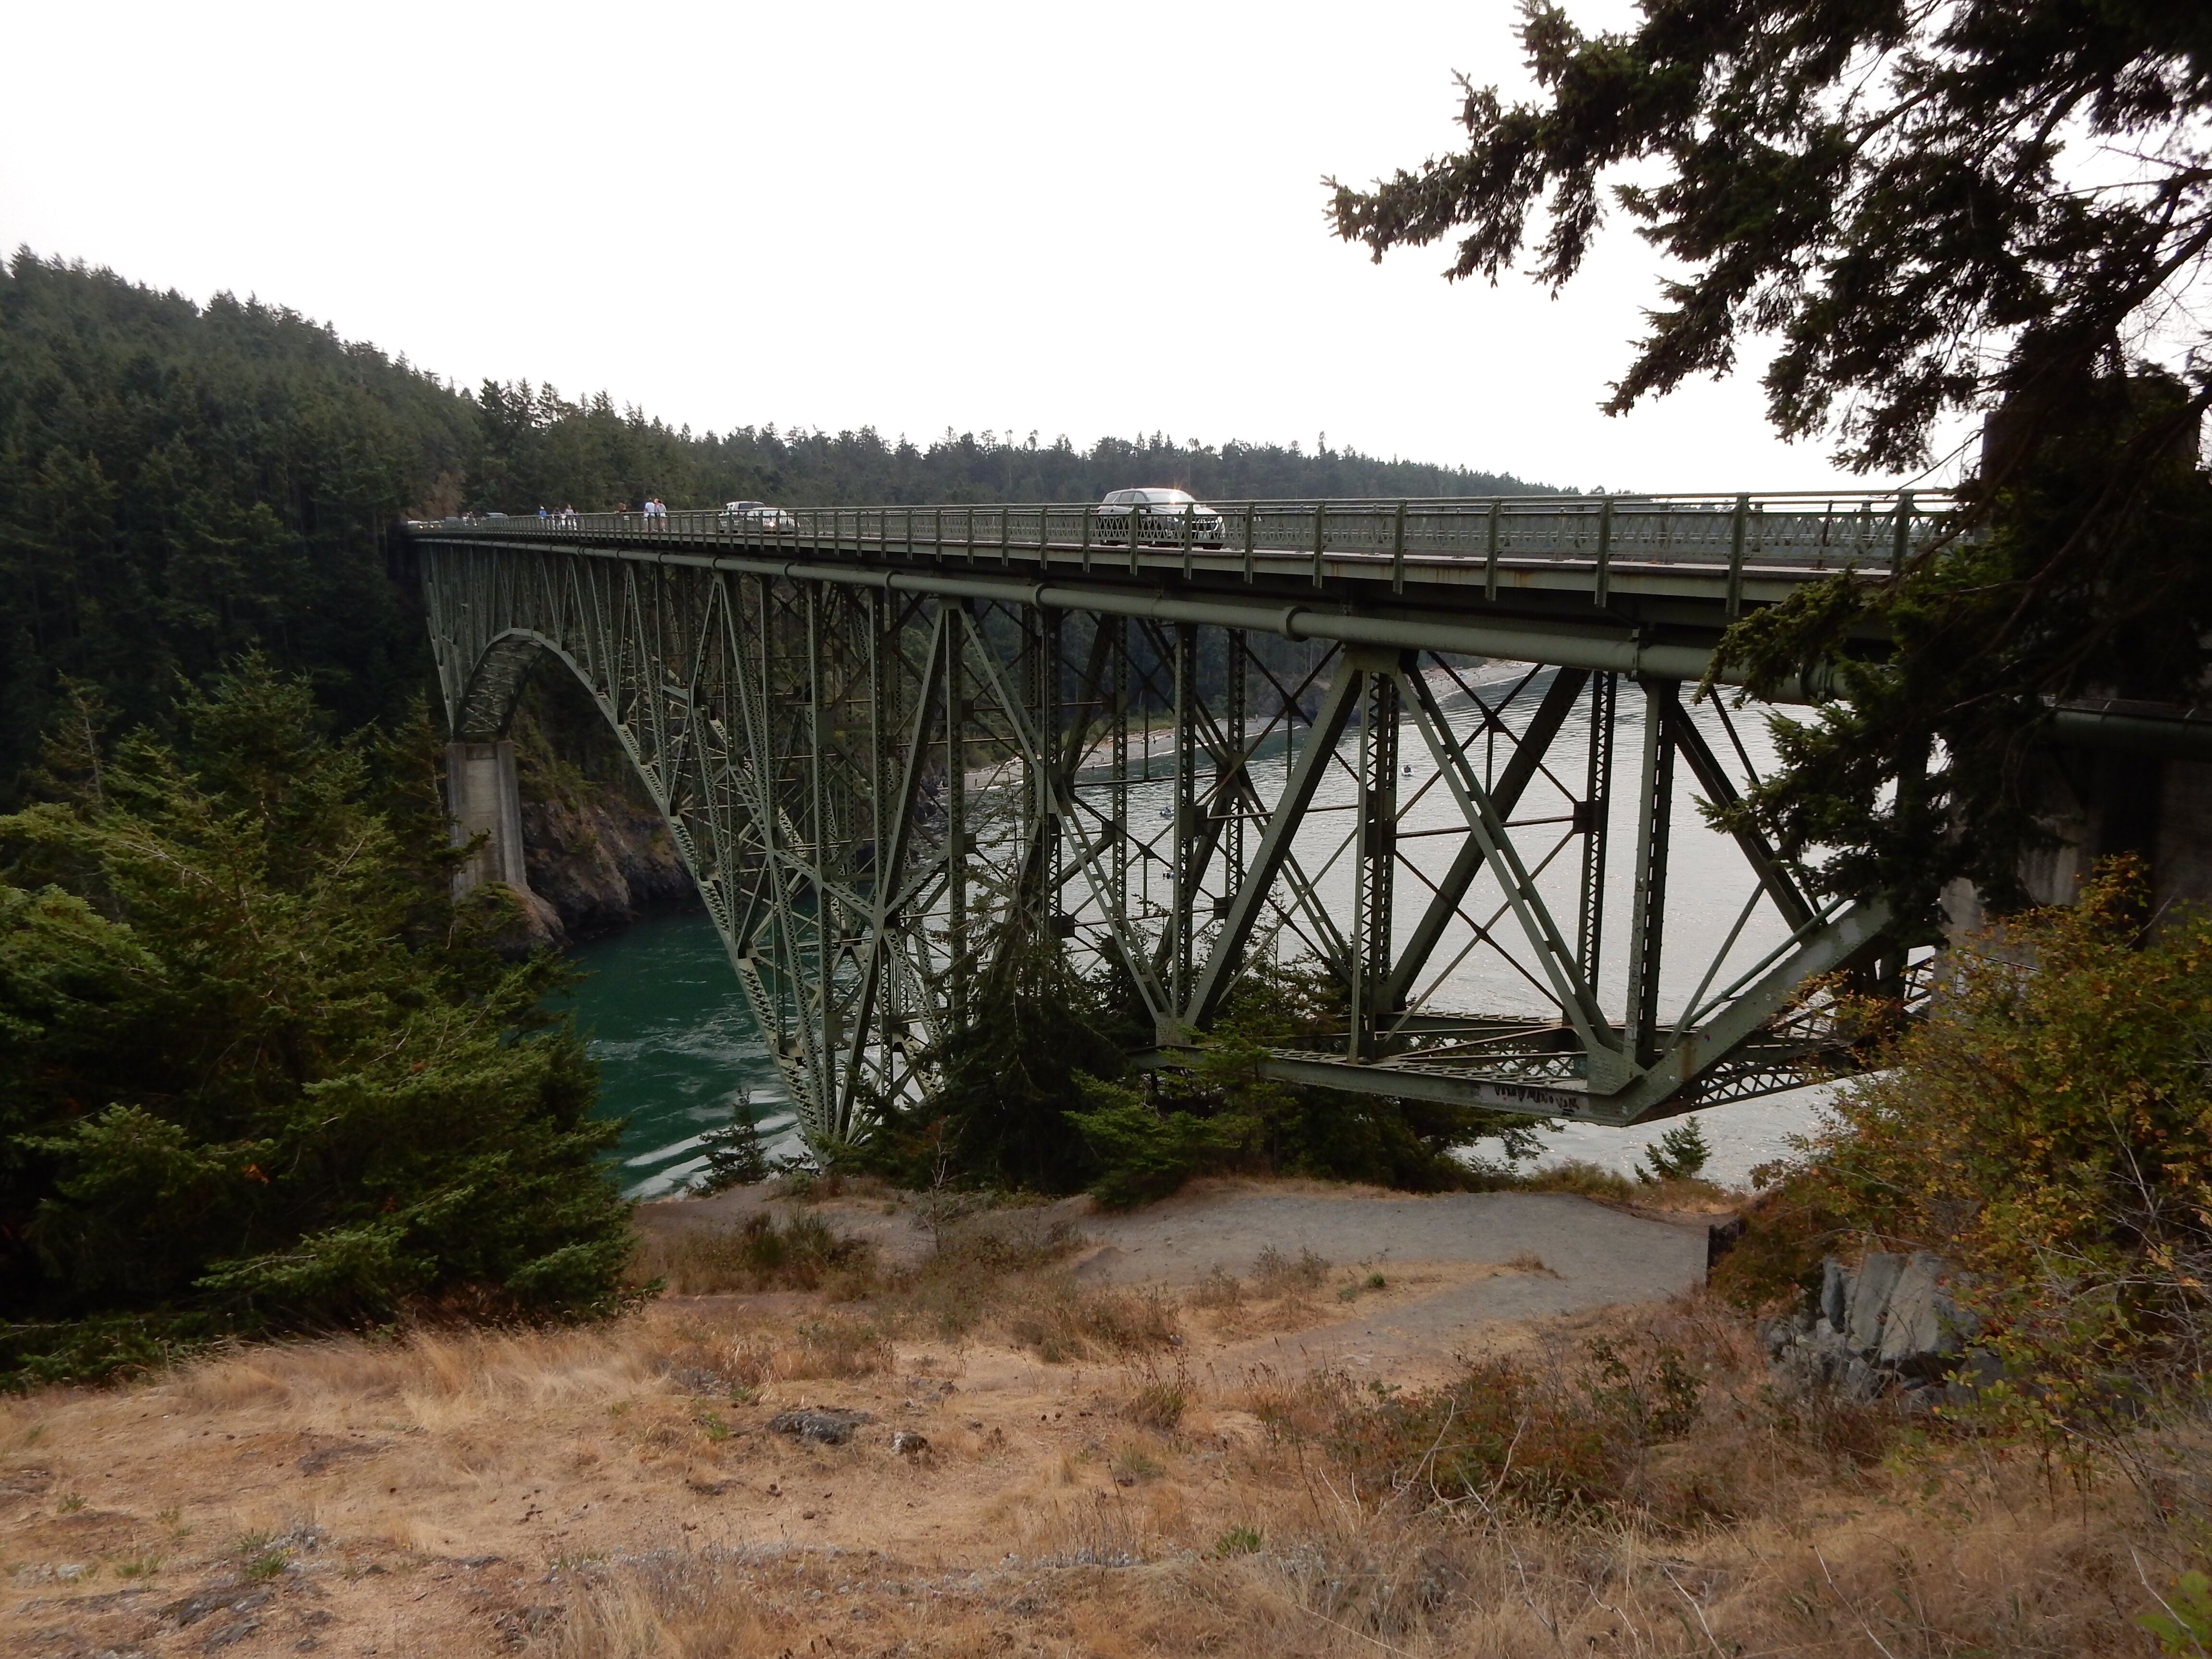 A nice shot of the truss arch bridge over Deception Pass, complete with the swirling current below.